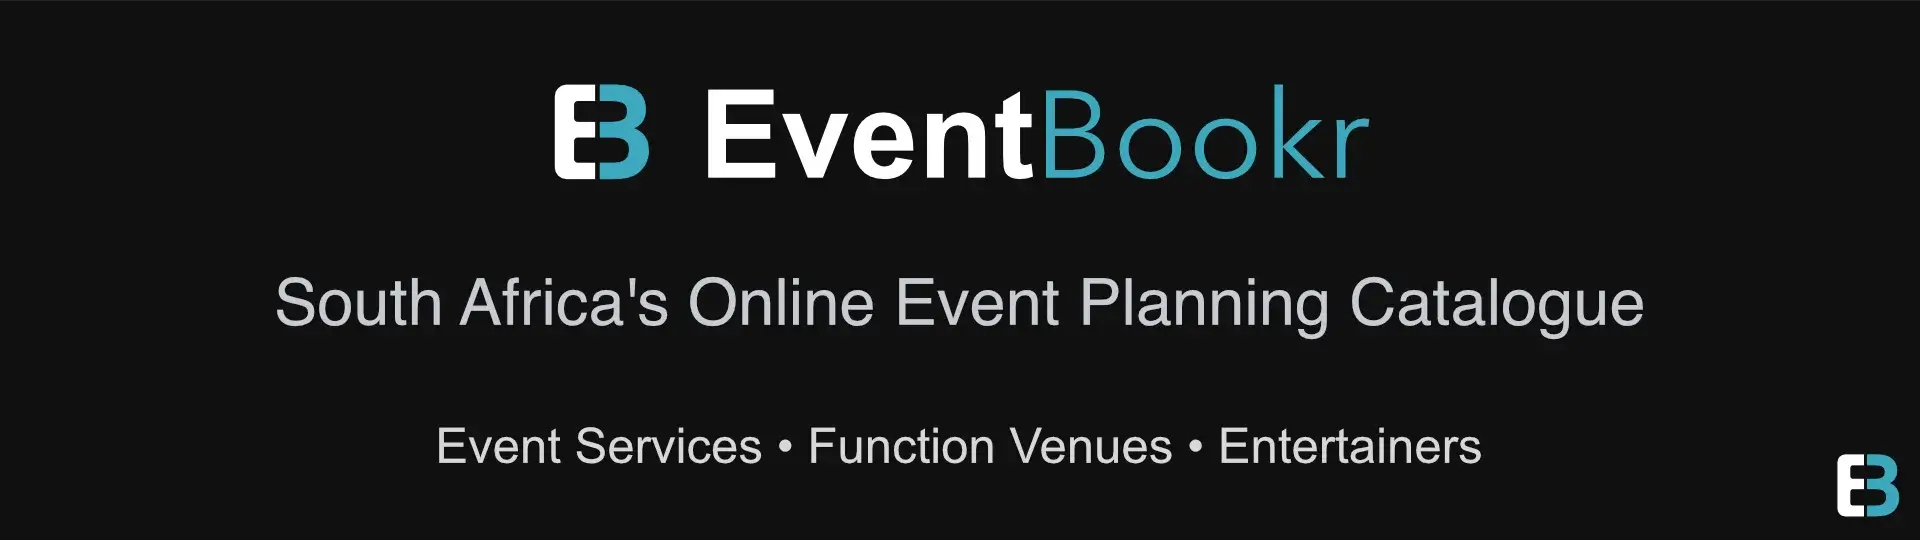 EventBookr South Africa is an online event planning directory. Event planners can find and book event services, function venues and live entertainers.